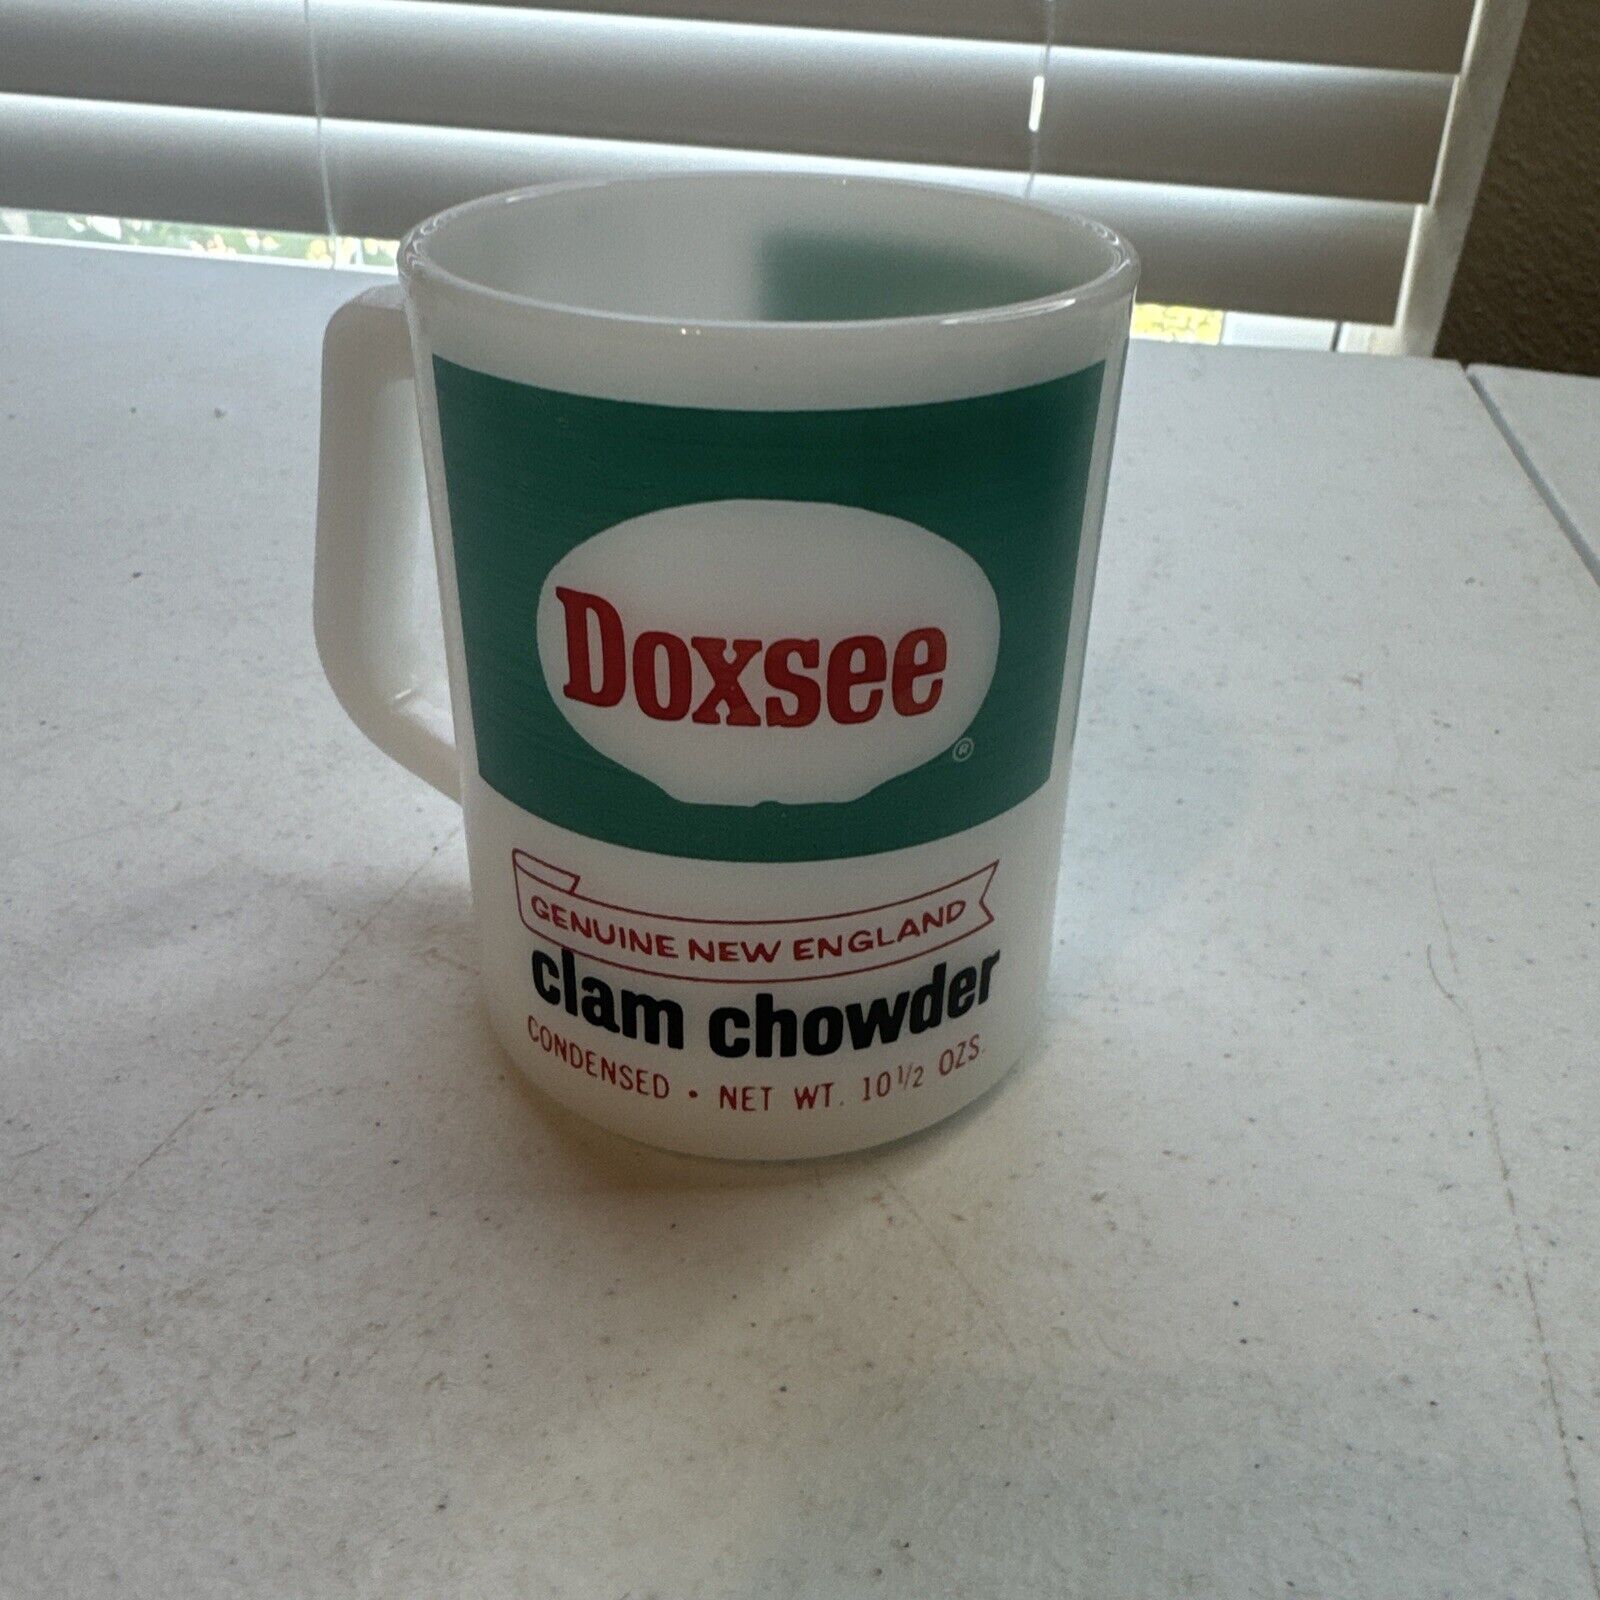 VINTAGE DOXSEE CLAM CHOWDER ADVERTISING FEDERAL GLASS HEAT PROOF CUP MUG USA